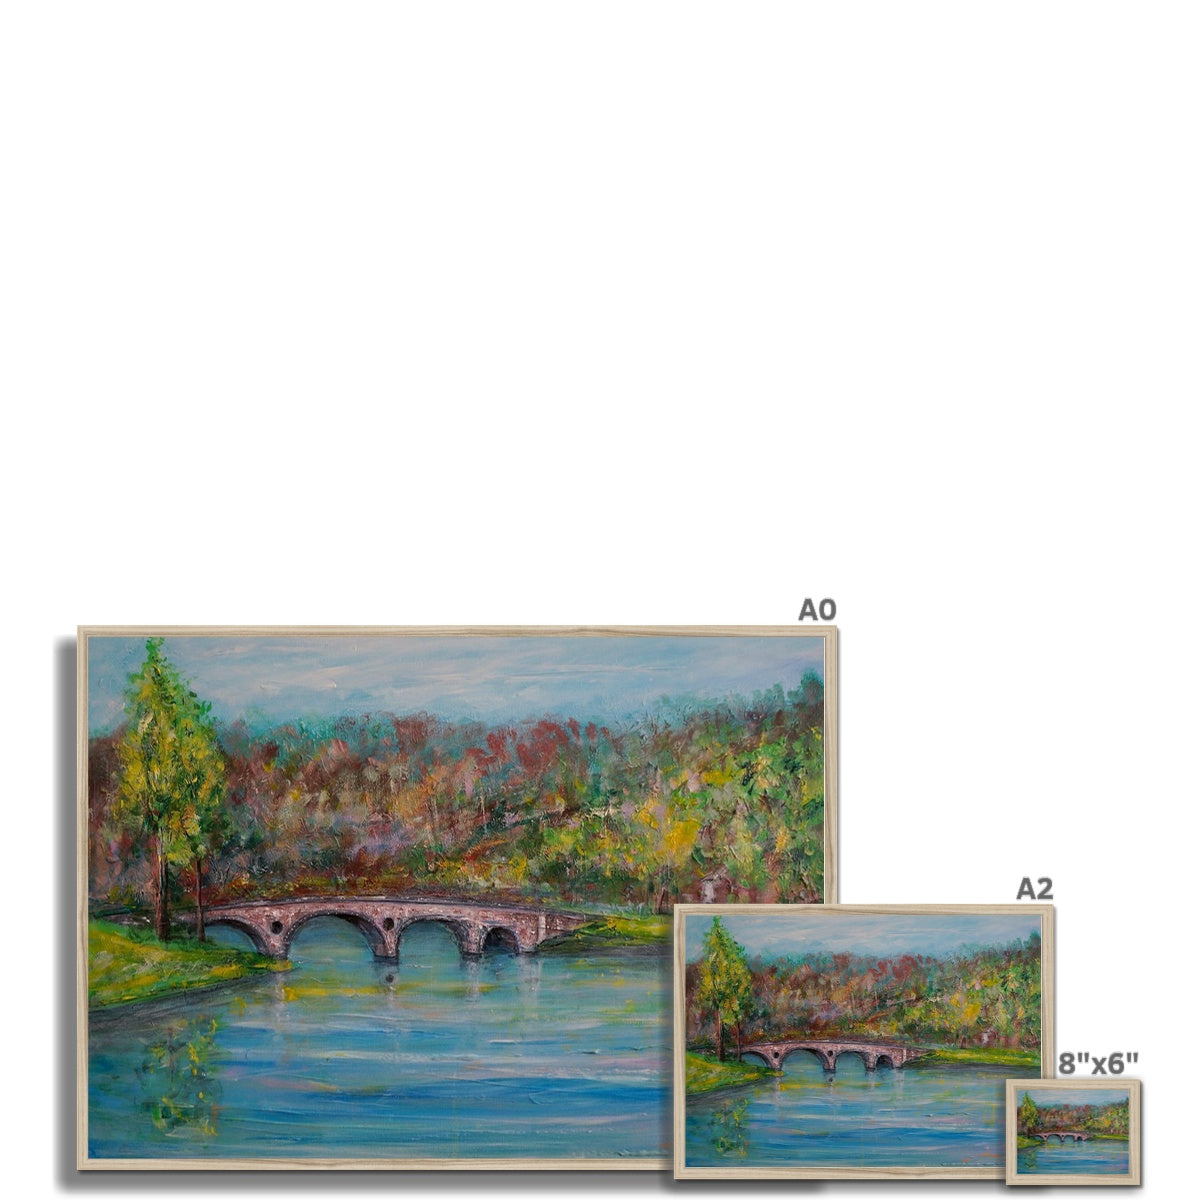 Kenmore Bridge Painting | Framed Prints From Scotland-Framed Prints-Scottish Highlands & Lowlands Art Gallery-Paintings, Prints, Homeware, Art Gifts From Scotland By Scottish Artist Kevin Hunter